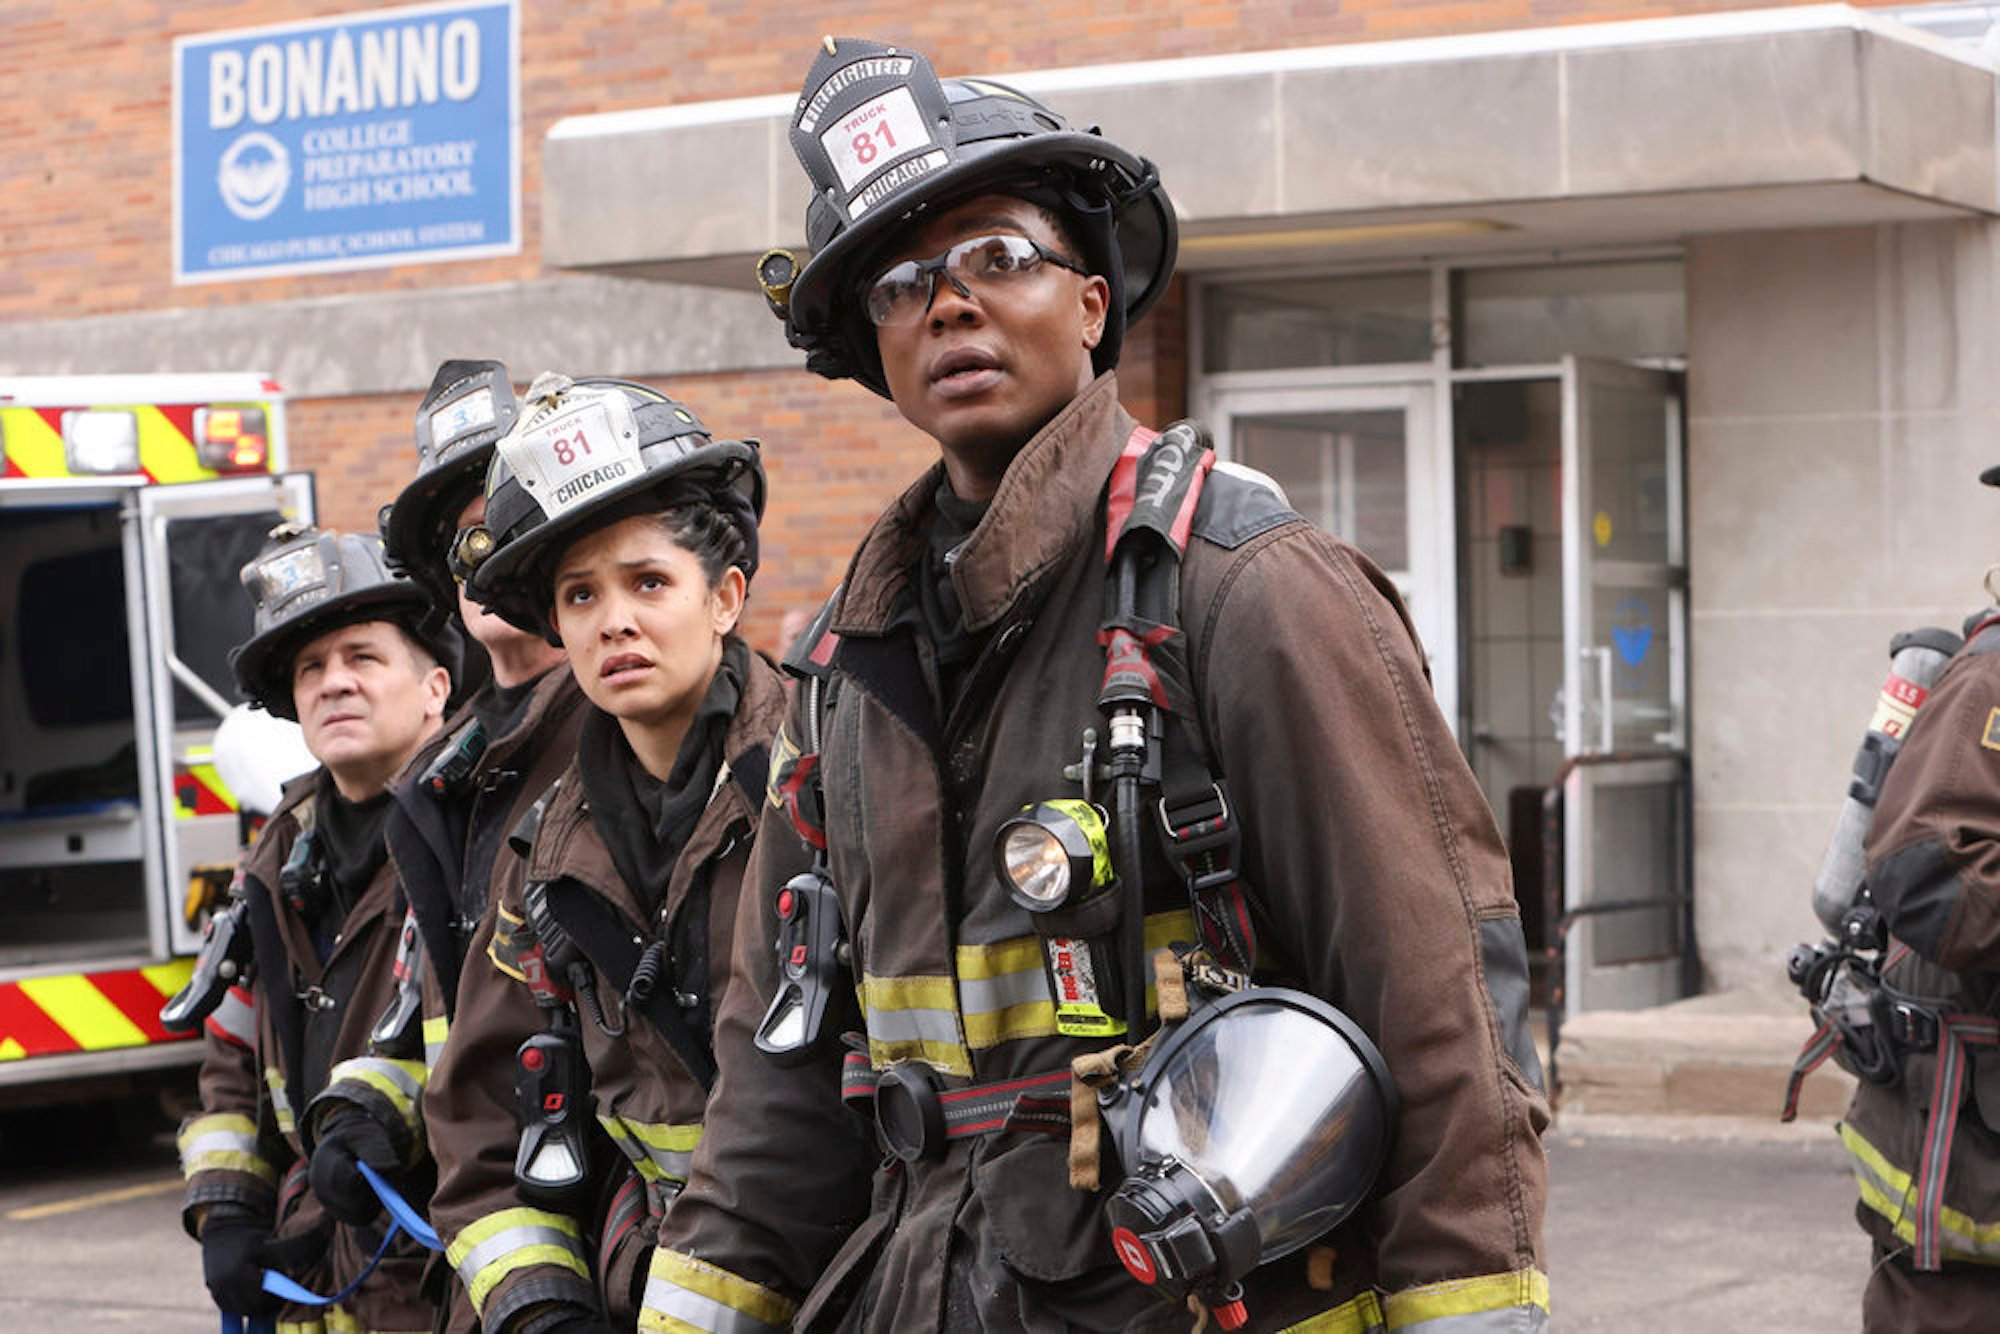 Anthony Ferraris as Tony, Miranda Rae Mayo as Stella Kidd, and Chris Mansa as Mason all in firefighting gear looking fearfully in 'Chicago Fire' Season 10 Episode 19